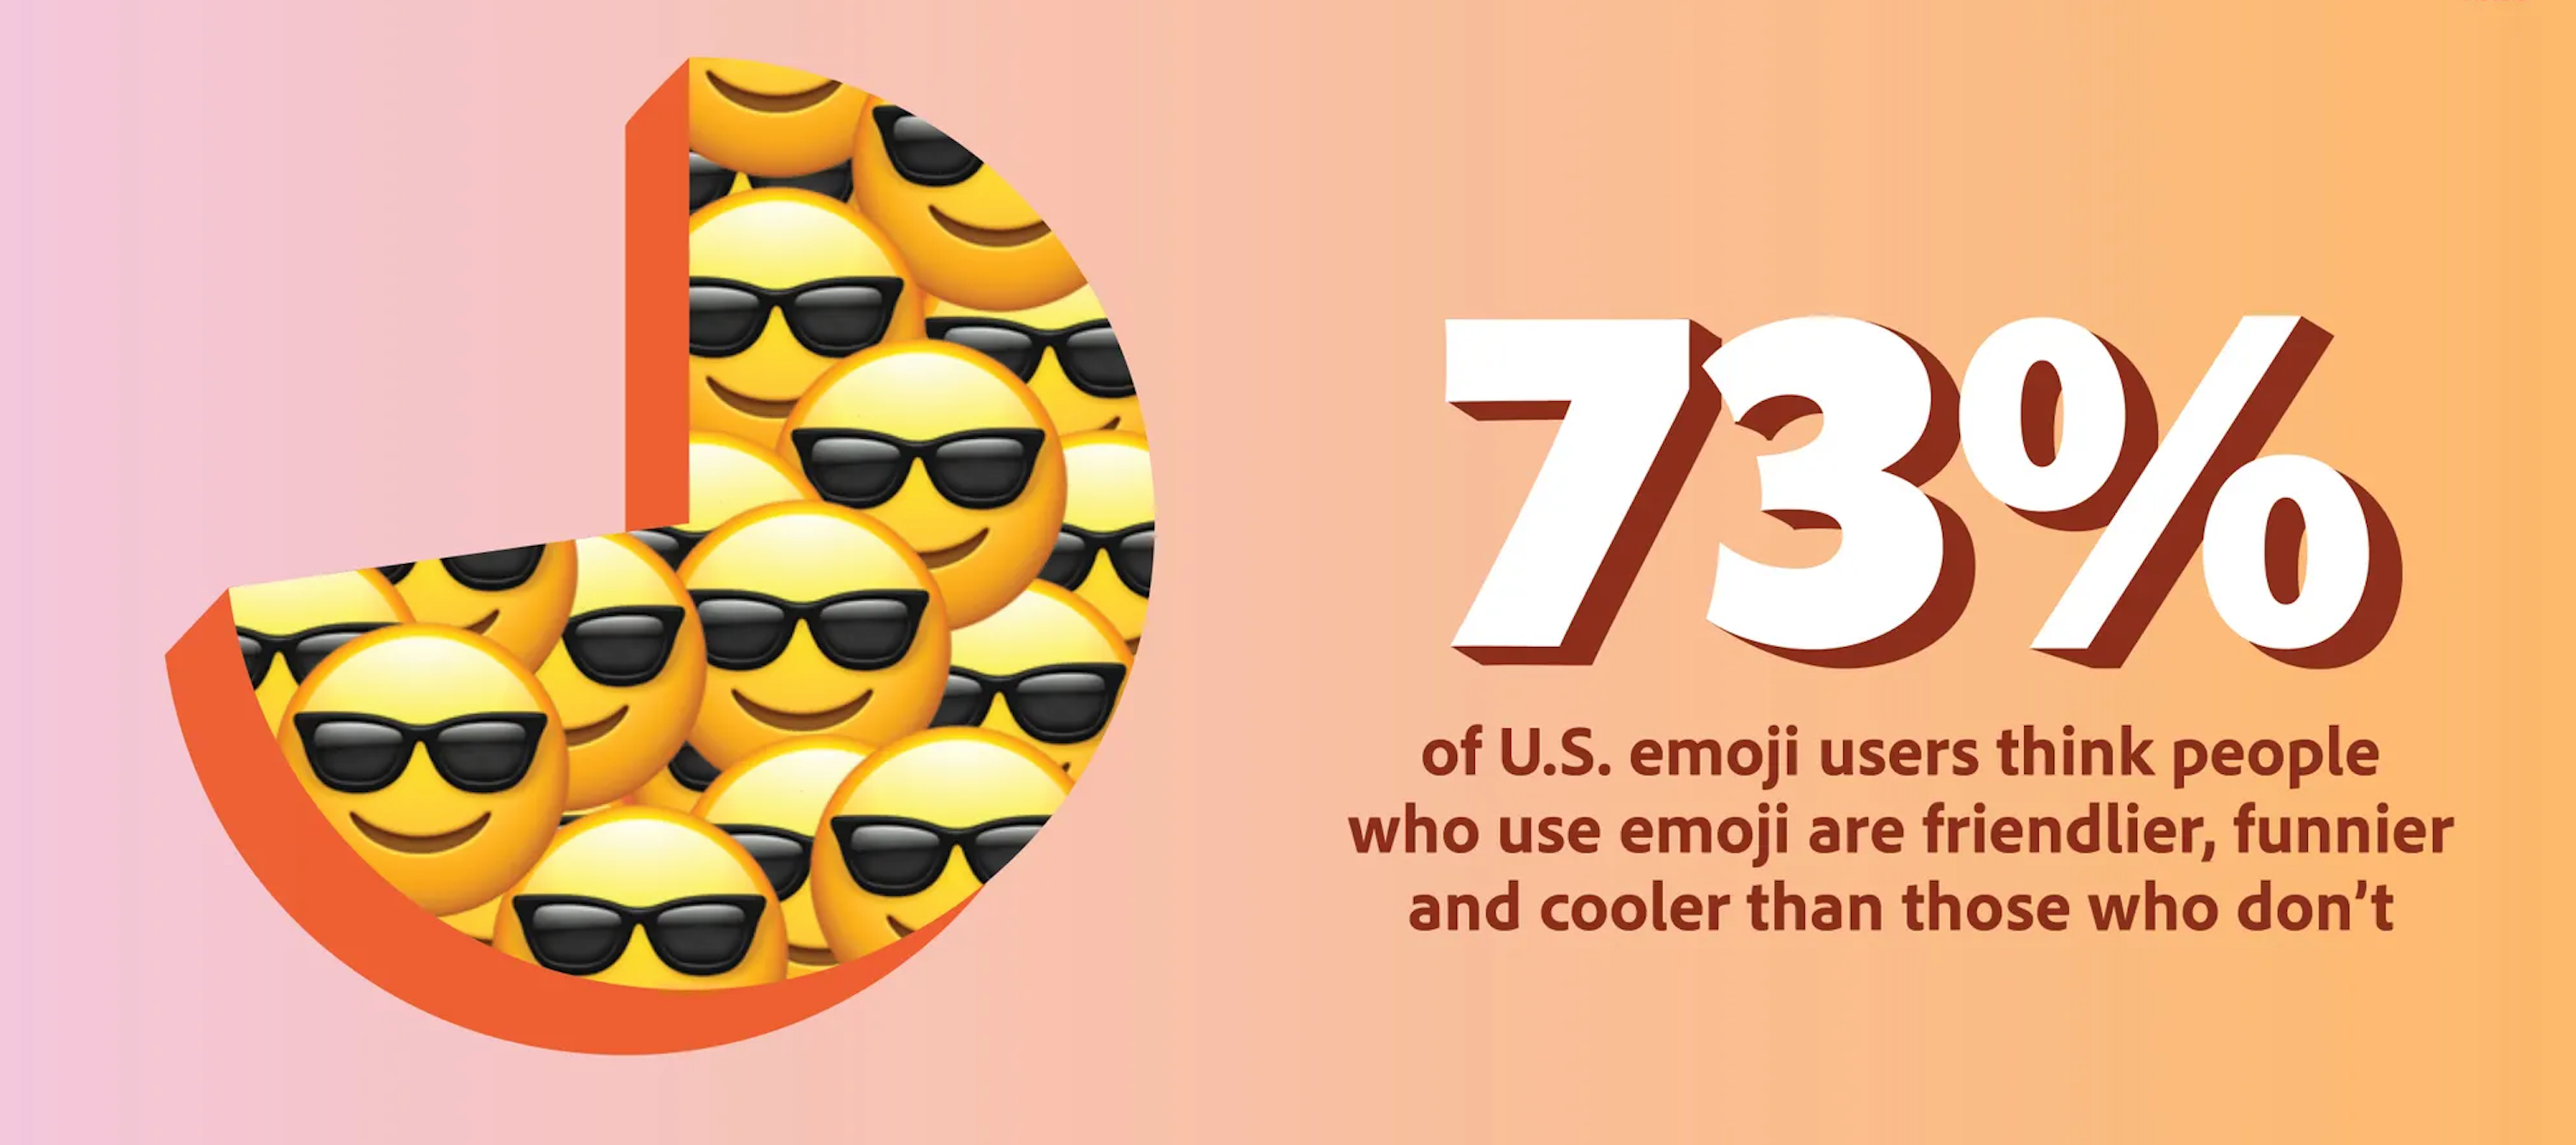 The Future of Creativity: 2022 U.S. Emoji Trend Report reveals insights on emoji use for 💼, 🥰 and more 👀